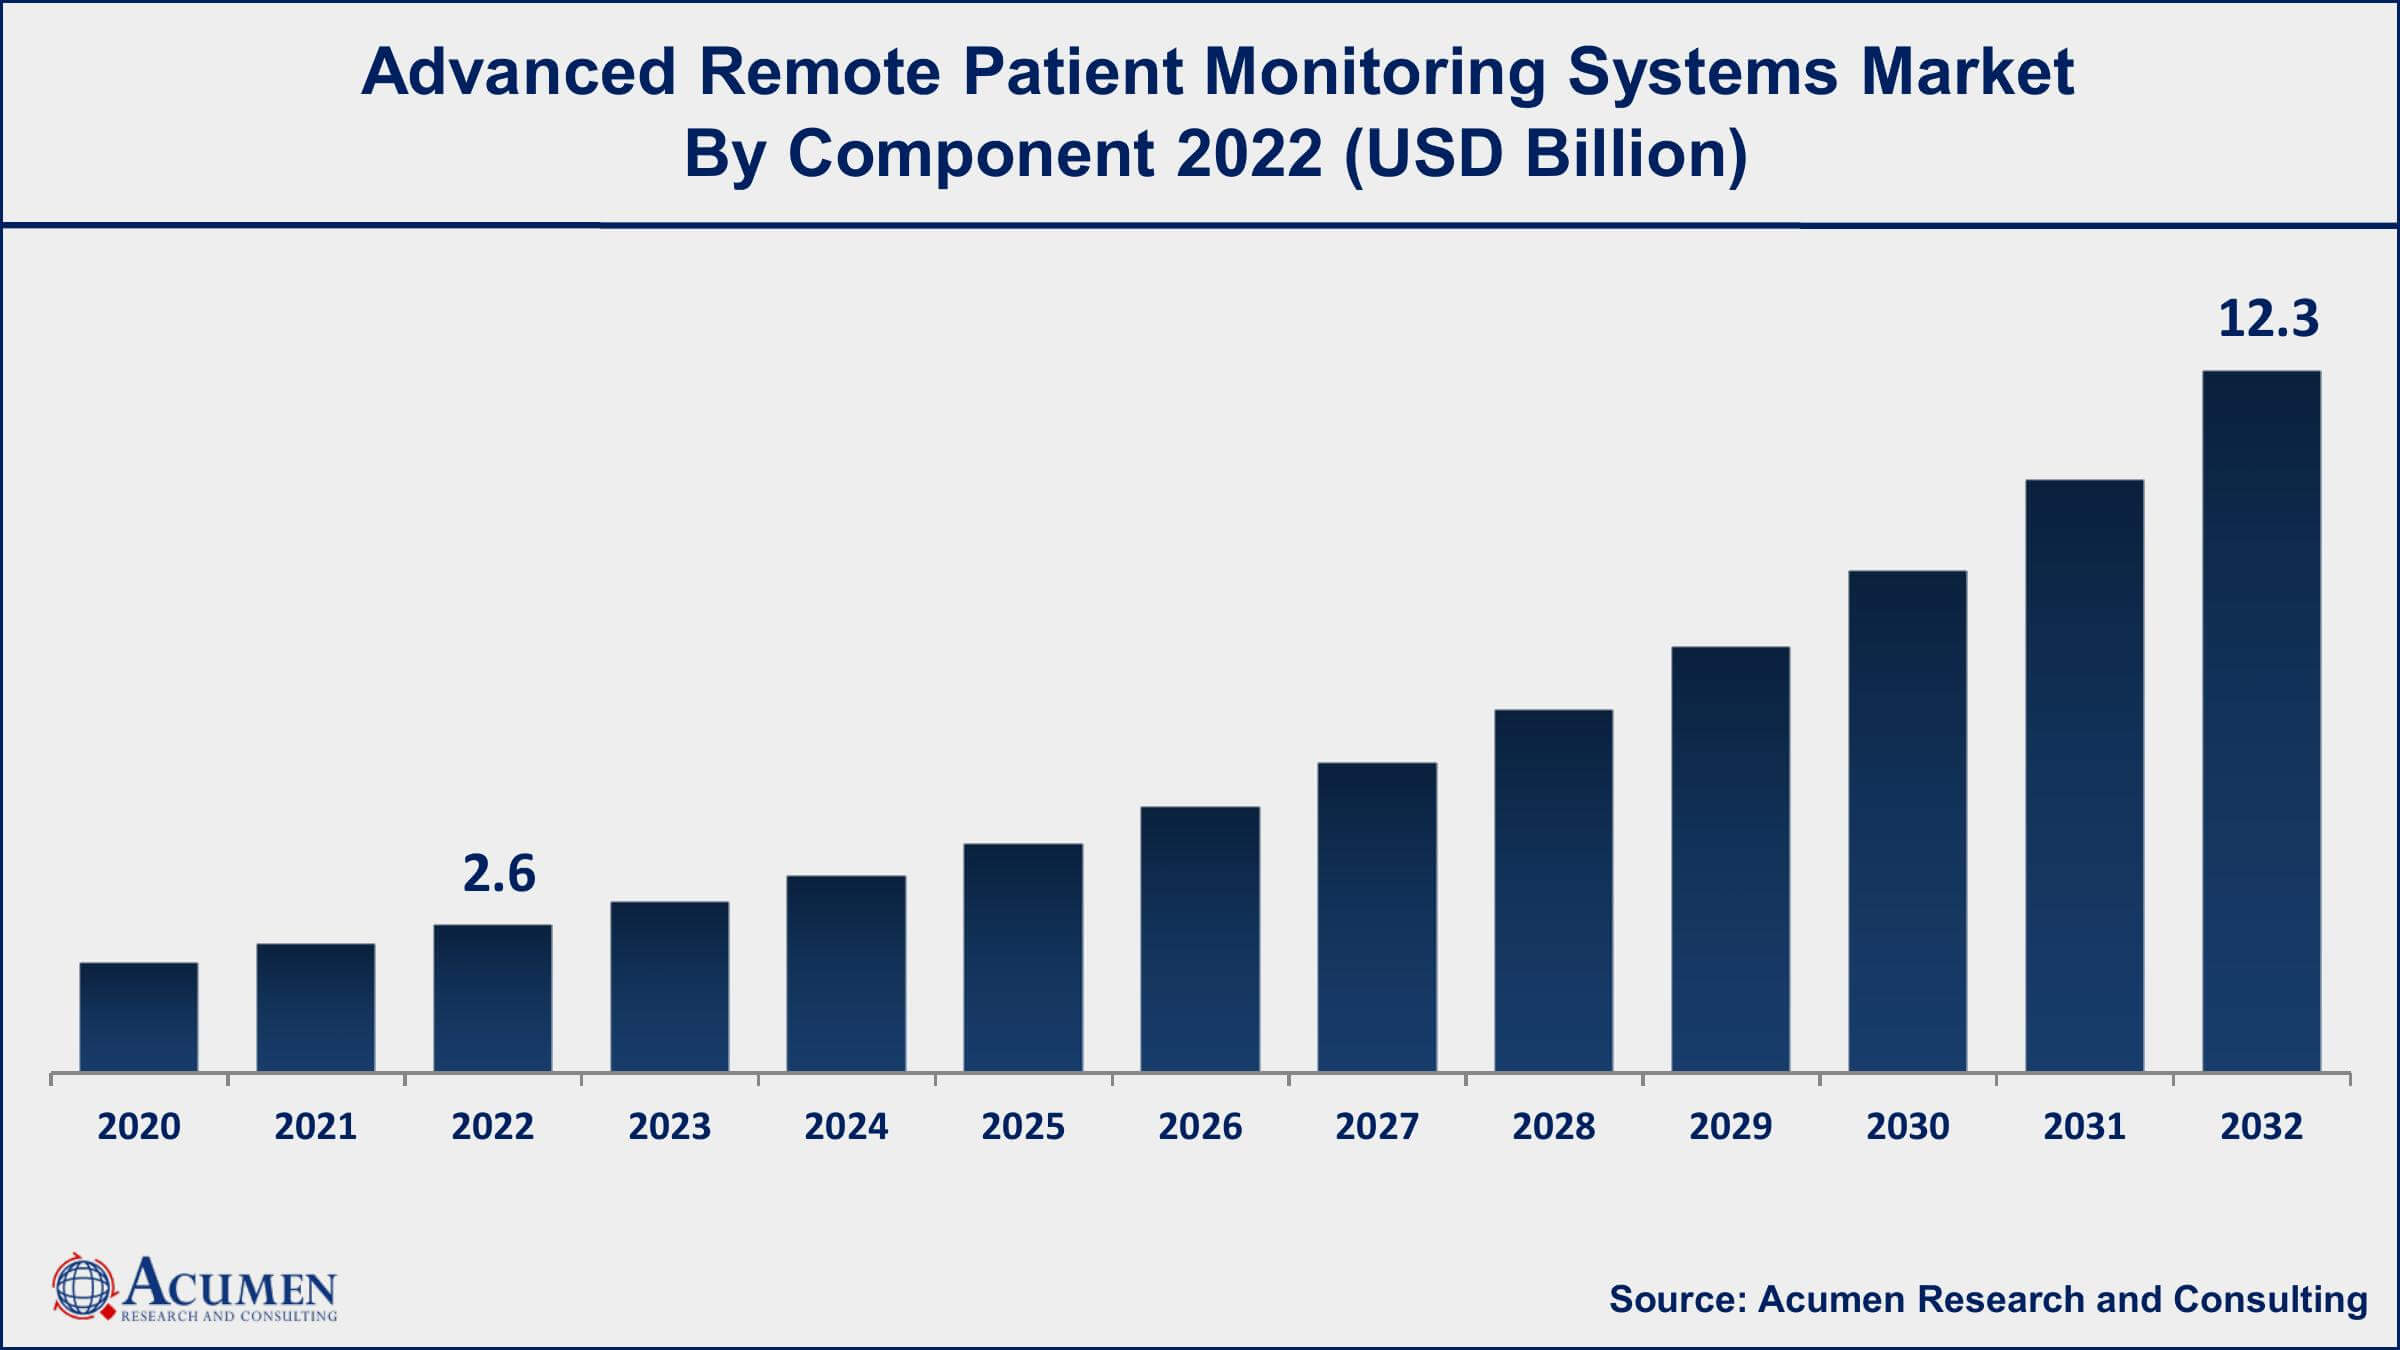 Global Advanced Remote Patient Monitoring Systems Market Trends